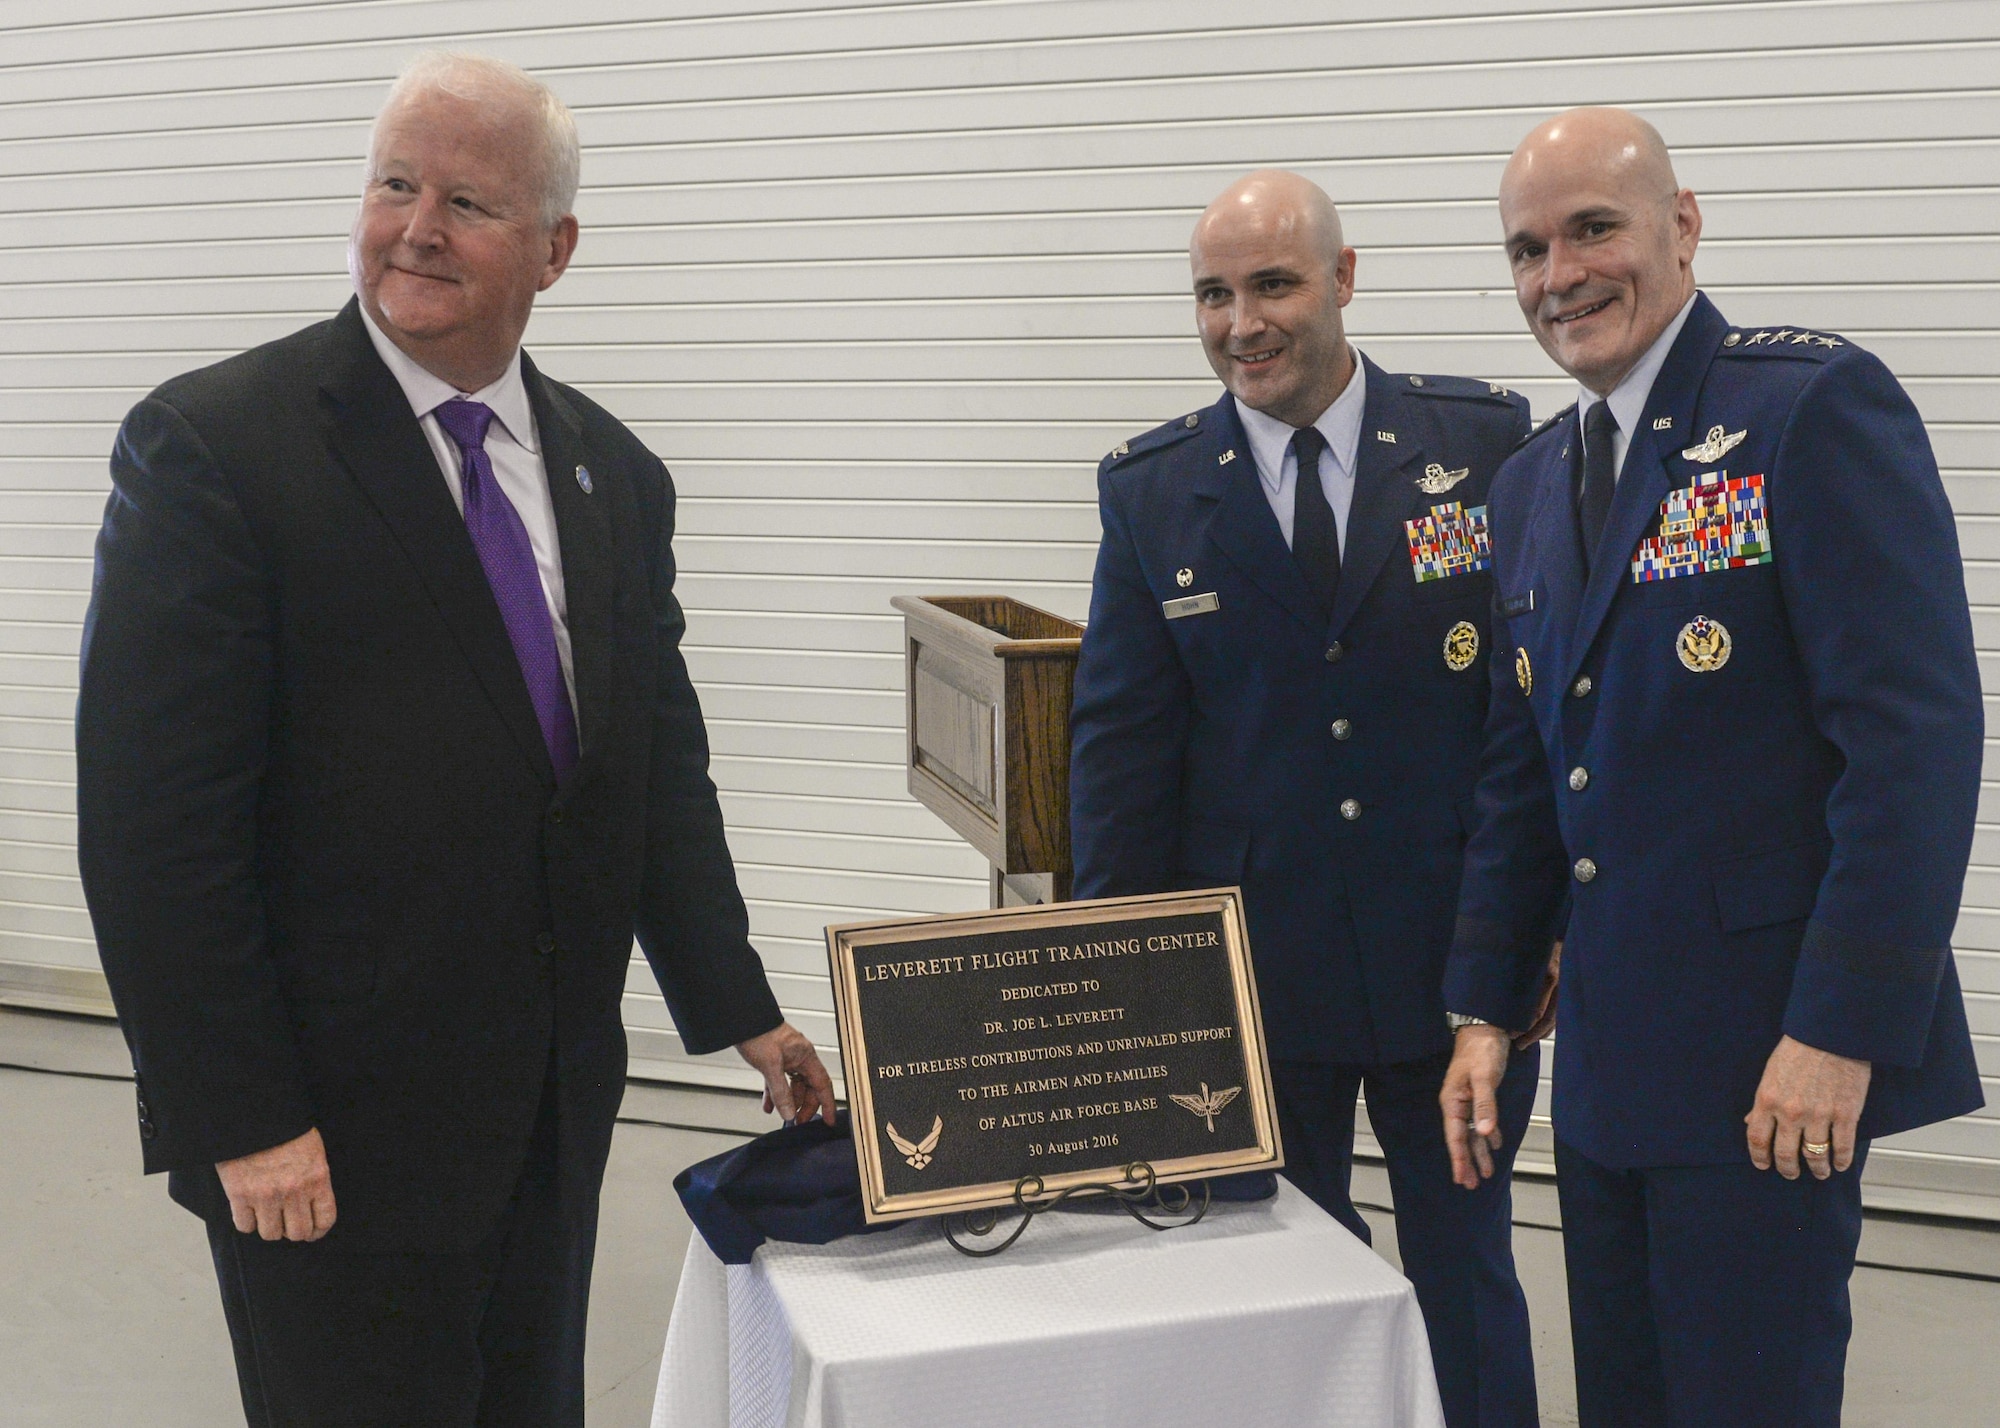 Dr. Joe Leverett, Chairman of the Altus Military Affairs Committee, along with U.S. Air Force Col. Todd Hohn, commander of the 97th Air Mobility Wing, and U.S. Air Force Gen. Carlton Everhart II, pose for a photo at the “Forging the 46” event, Aug. 30, 2016, at Altus Air Force Base, Okla. The event consisted of an assumption of command for the reactivated 56th Air Refueling Squadron, dedication of the new KC-46 training facility, speeches from key Air Force and community leaders and concluded with a tour of the new facility for attendees.  (U.S. Air Force Photo by Airman Jackson N. Haddon/Released).